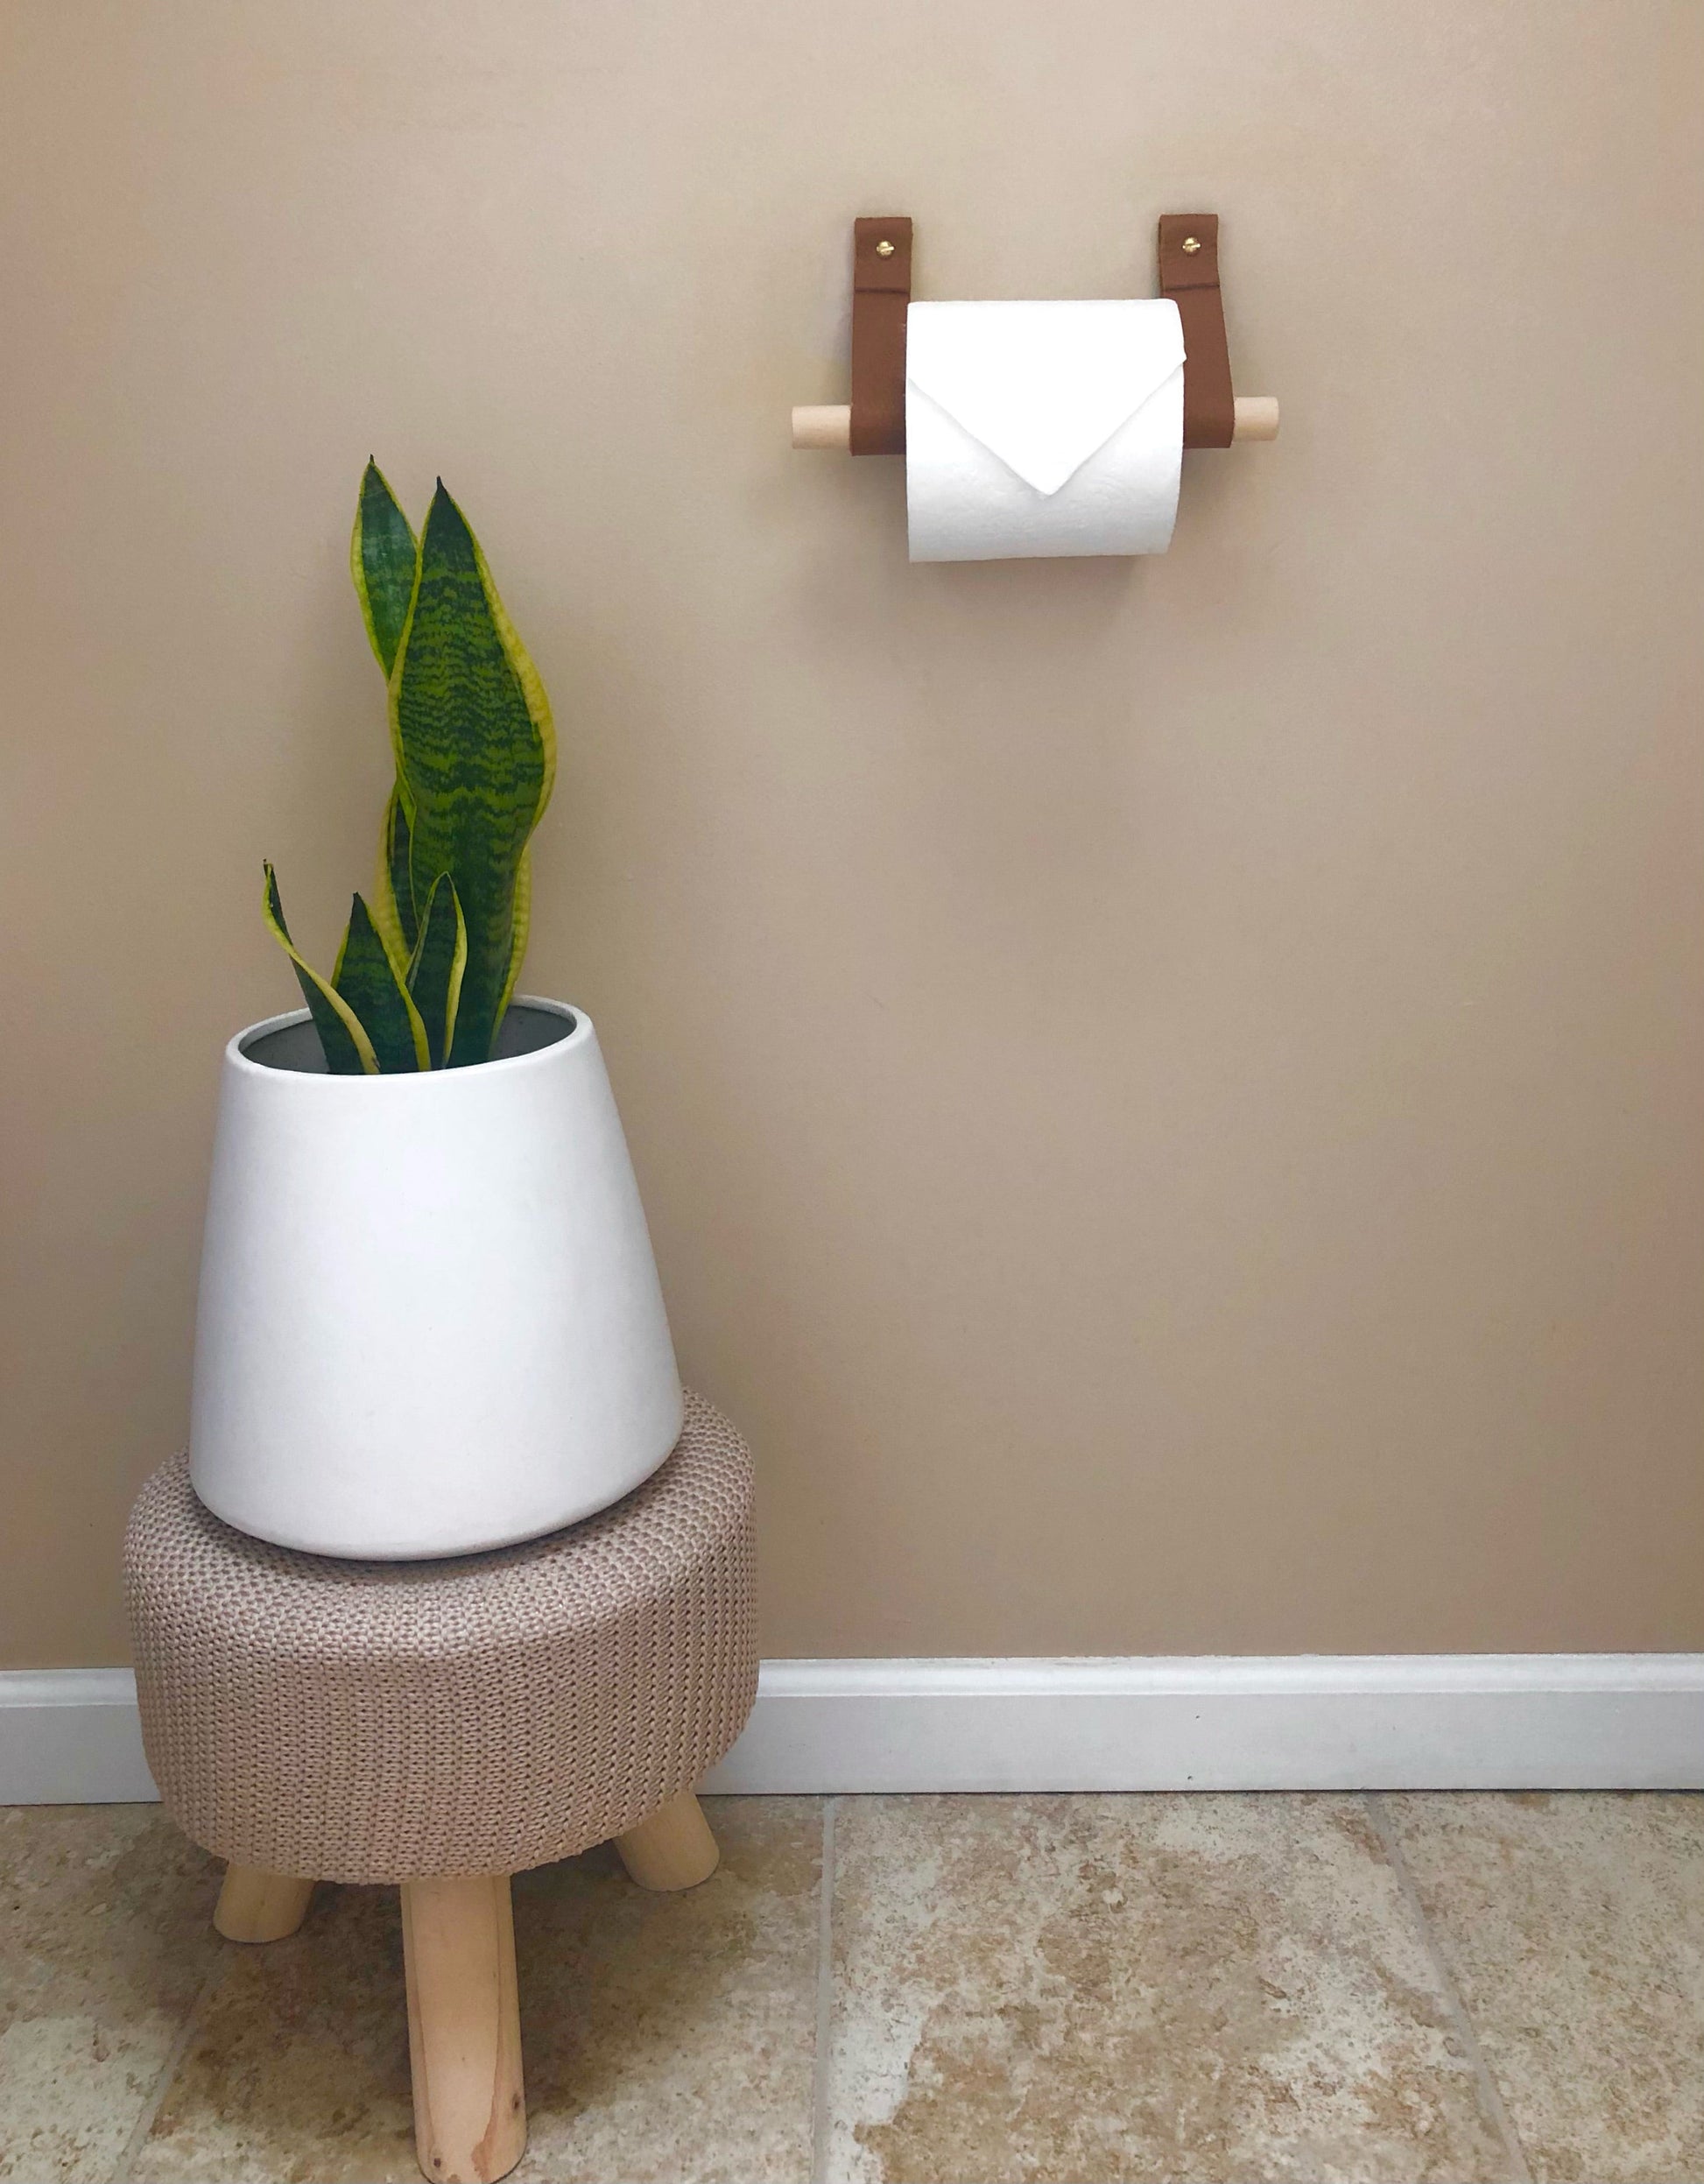 Leather Toilet Paper Holder Kit With Wood Dowel Walnut or Birch Simple Loo Roll  Holder Minimalist Leather Strap Hooks Rustic Bathroom Decor -  Hong Kong